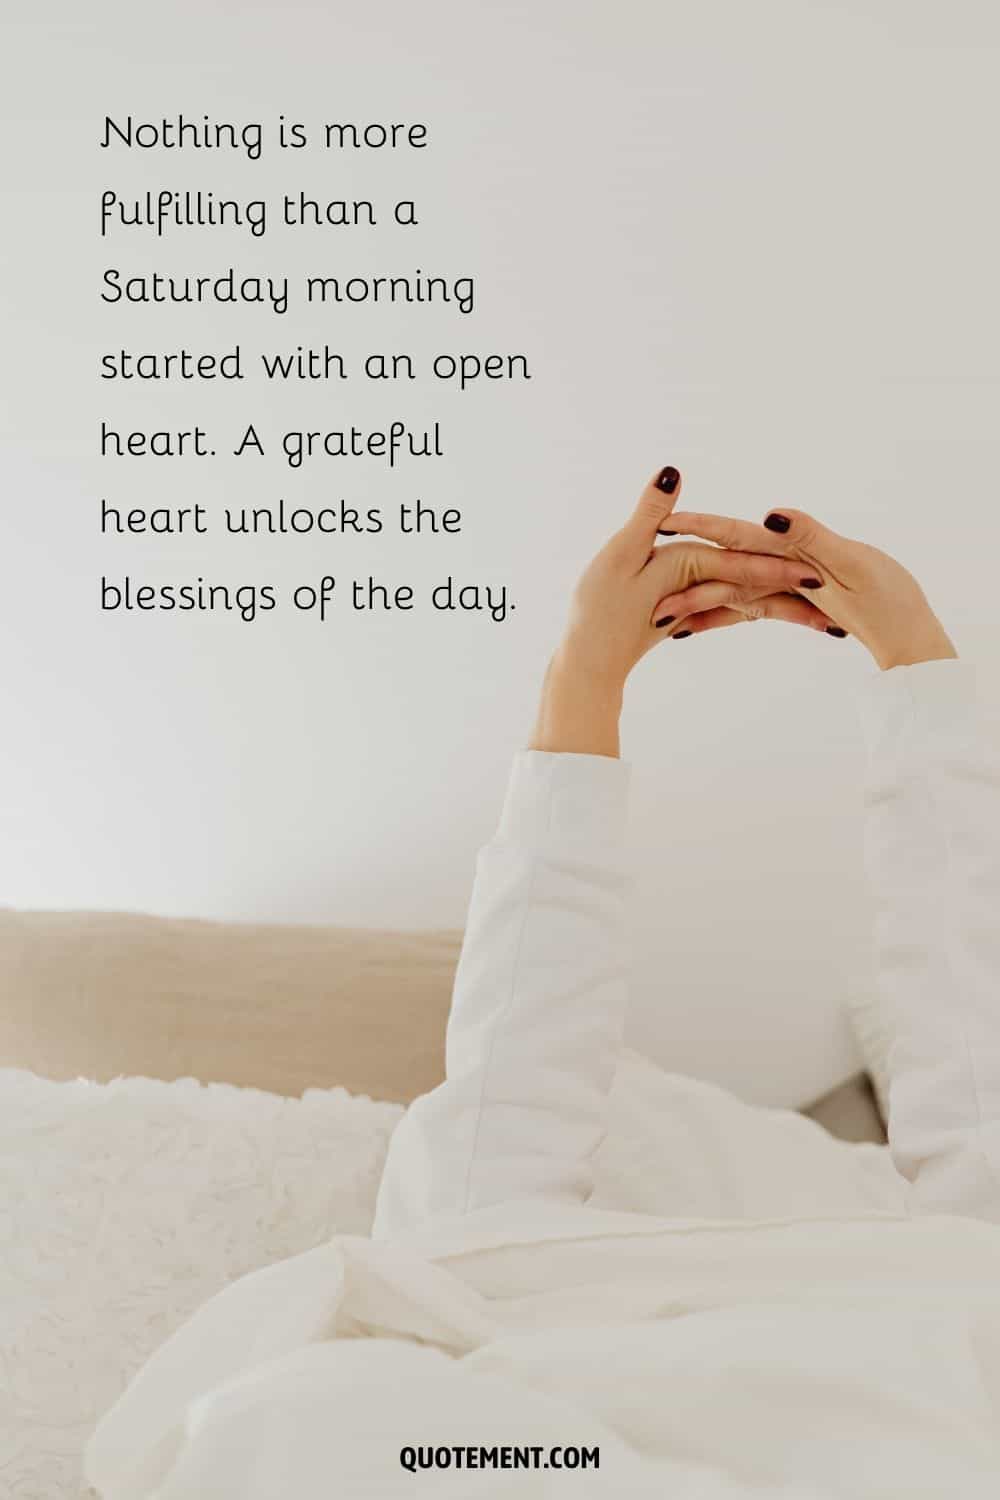 Nothing is more fulfilling than a Saturday morning started with an open heart.